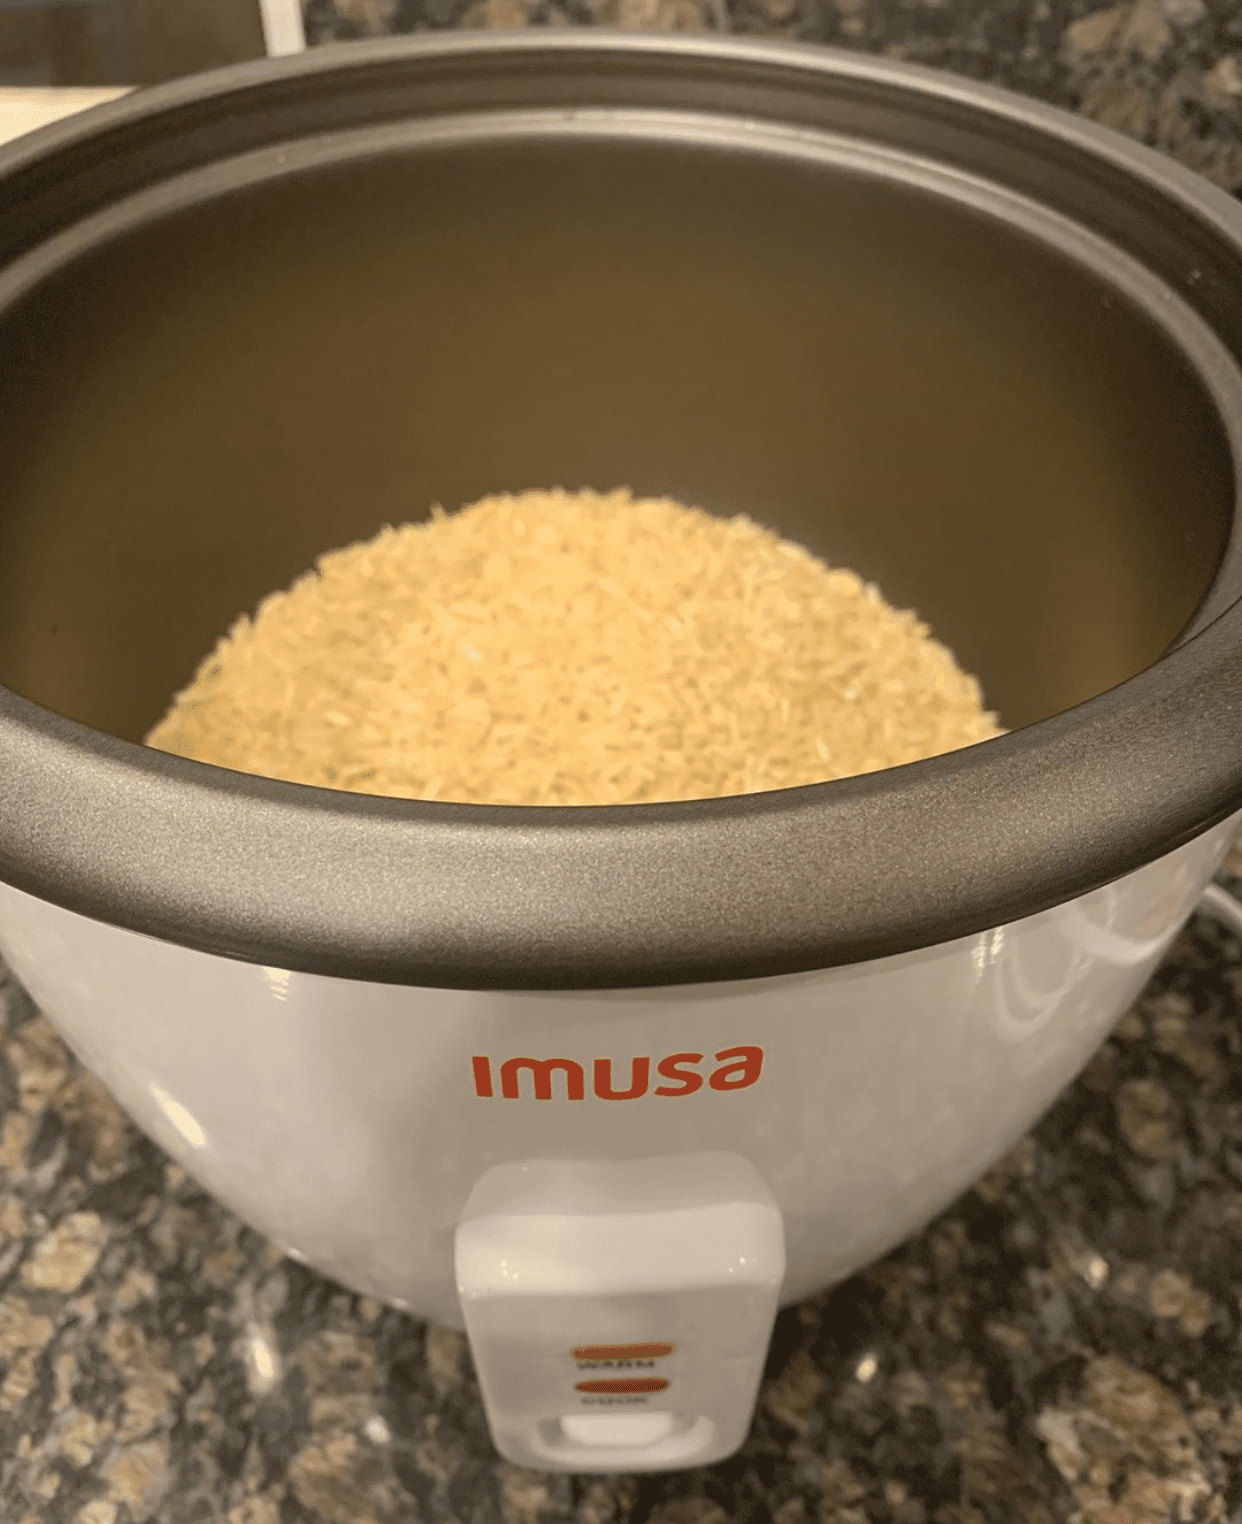 IMUSA IMUSA Electric PTFE Nonstick Rice Cooker 8 Cup 500 Watts